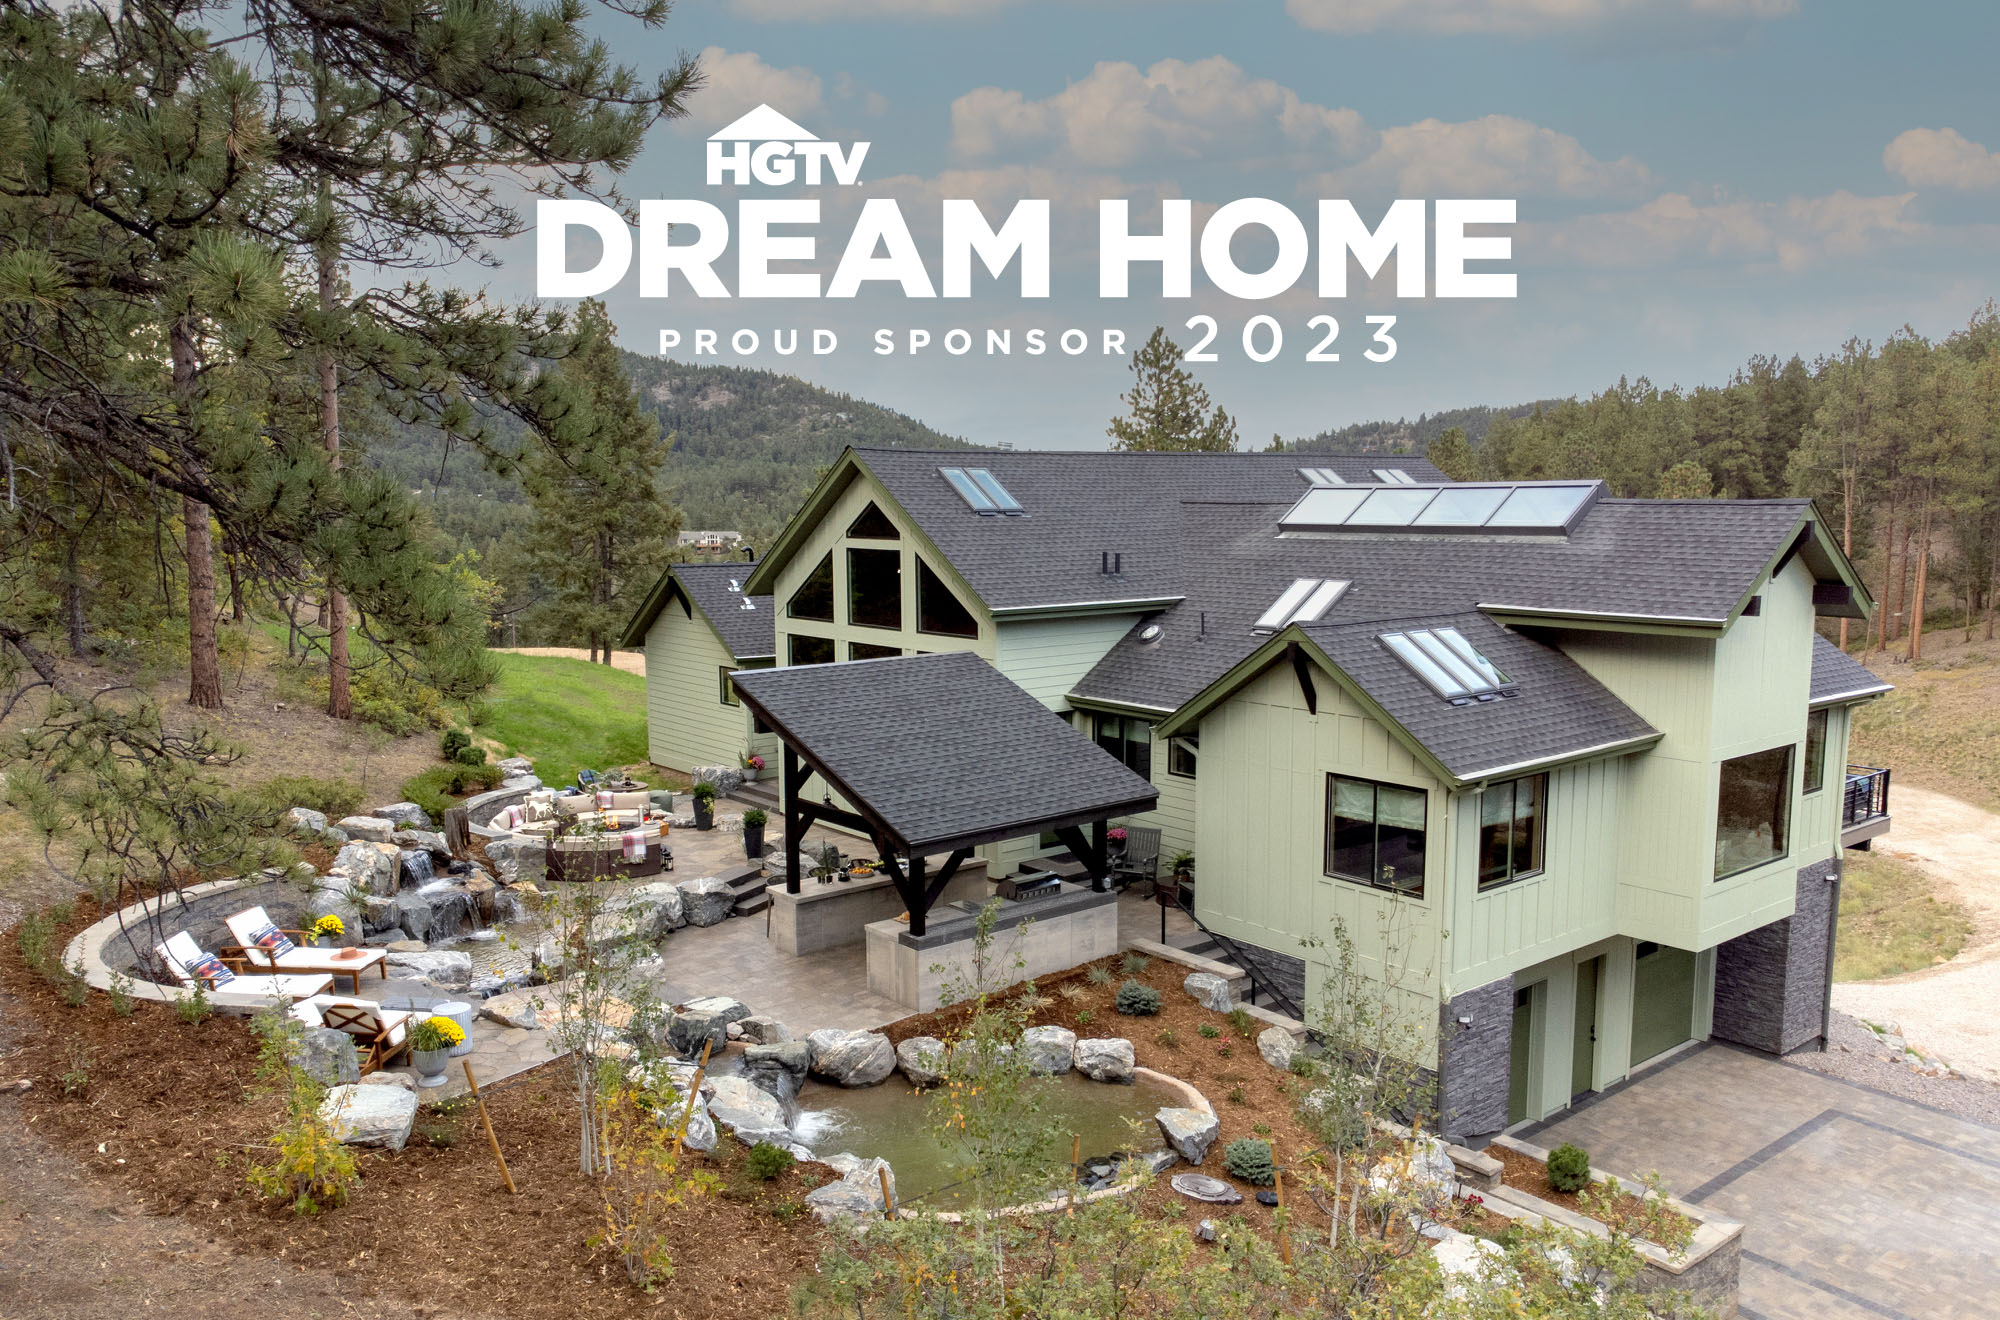 Hgtv Dream Home Winner 2023: Unbelievable Victory and a Dream Come True!